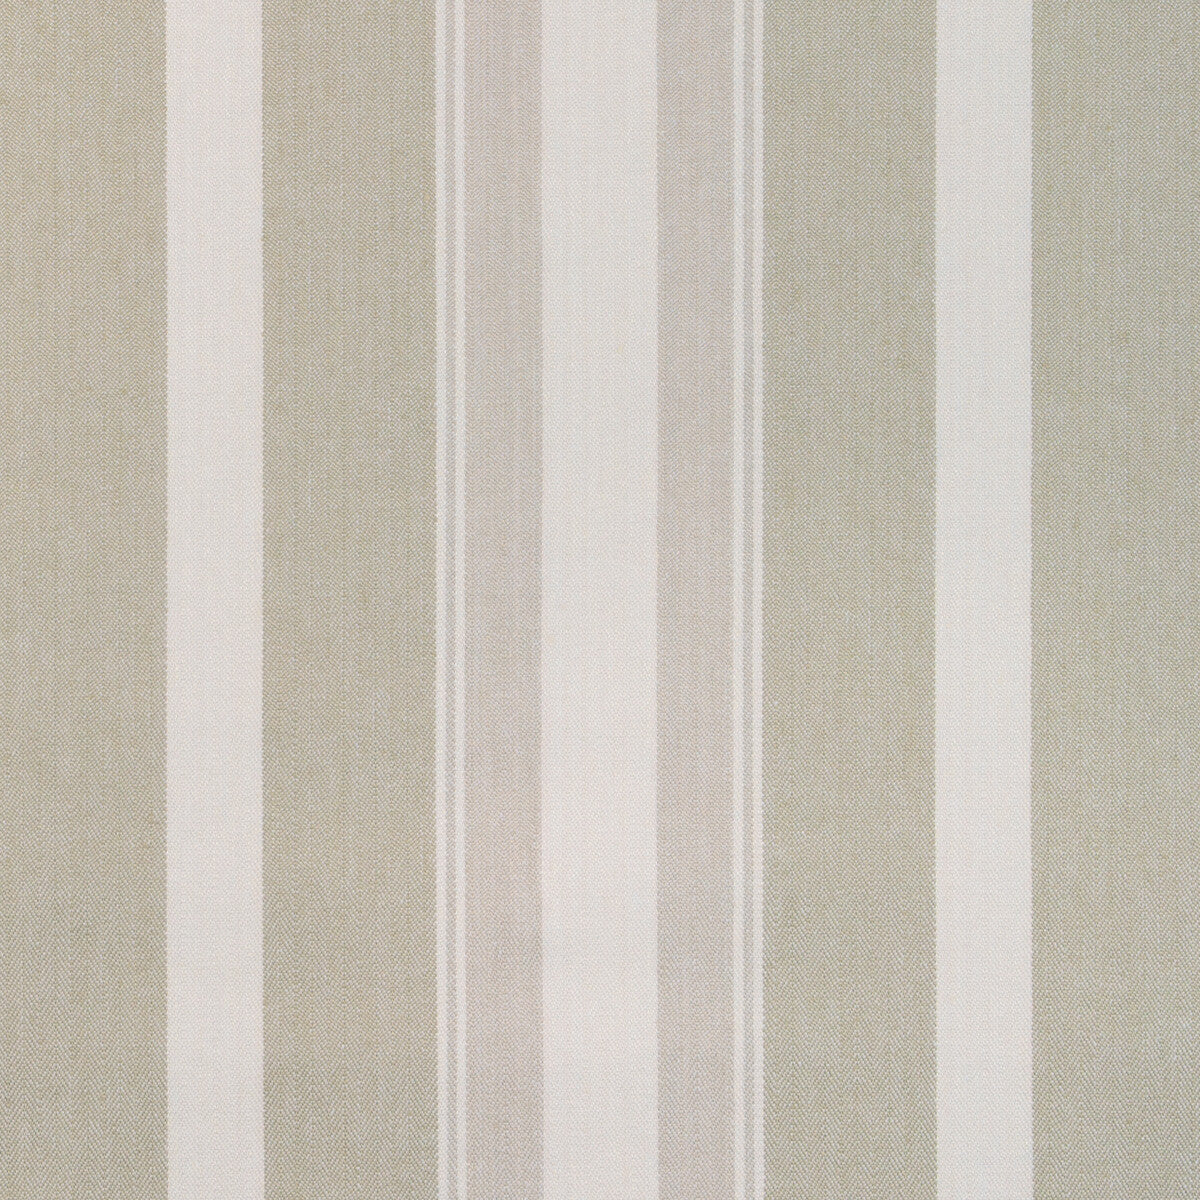 Natural Stripe fabric in flax color - pattern 36863.116.0 - by Kravet Couture in the Atelier Weaves collection